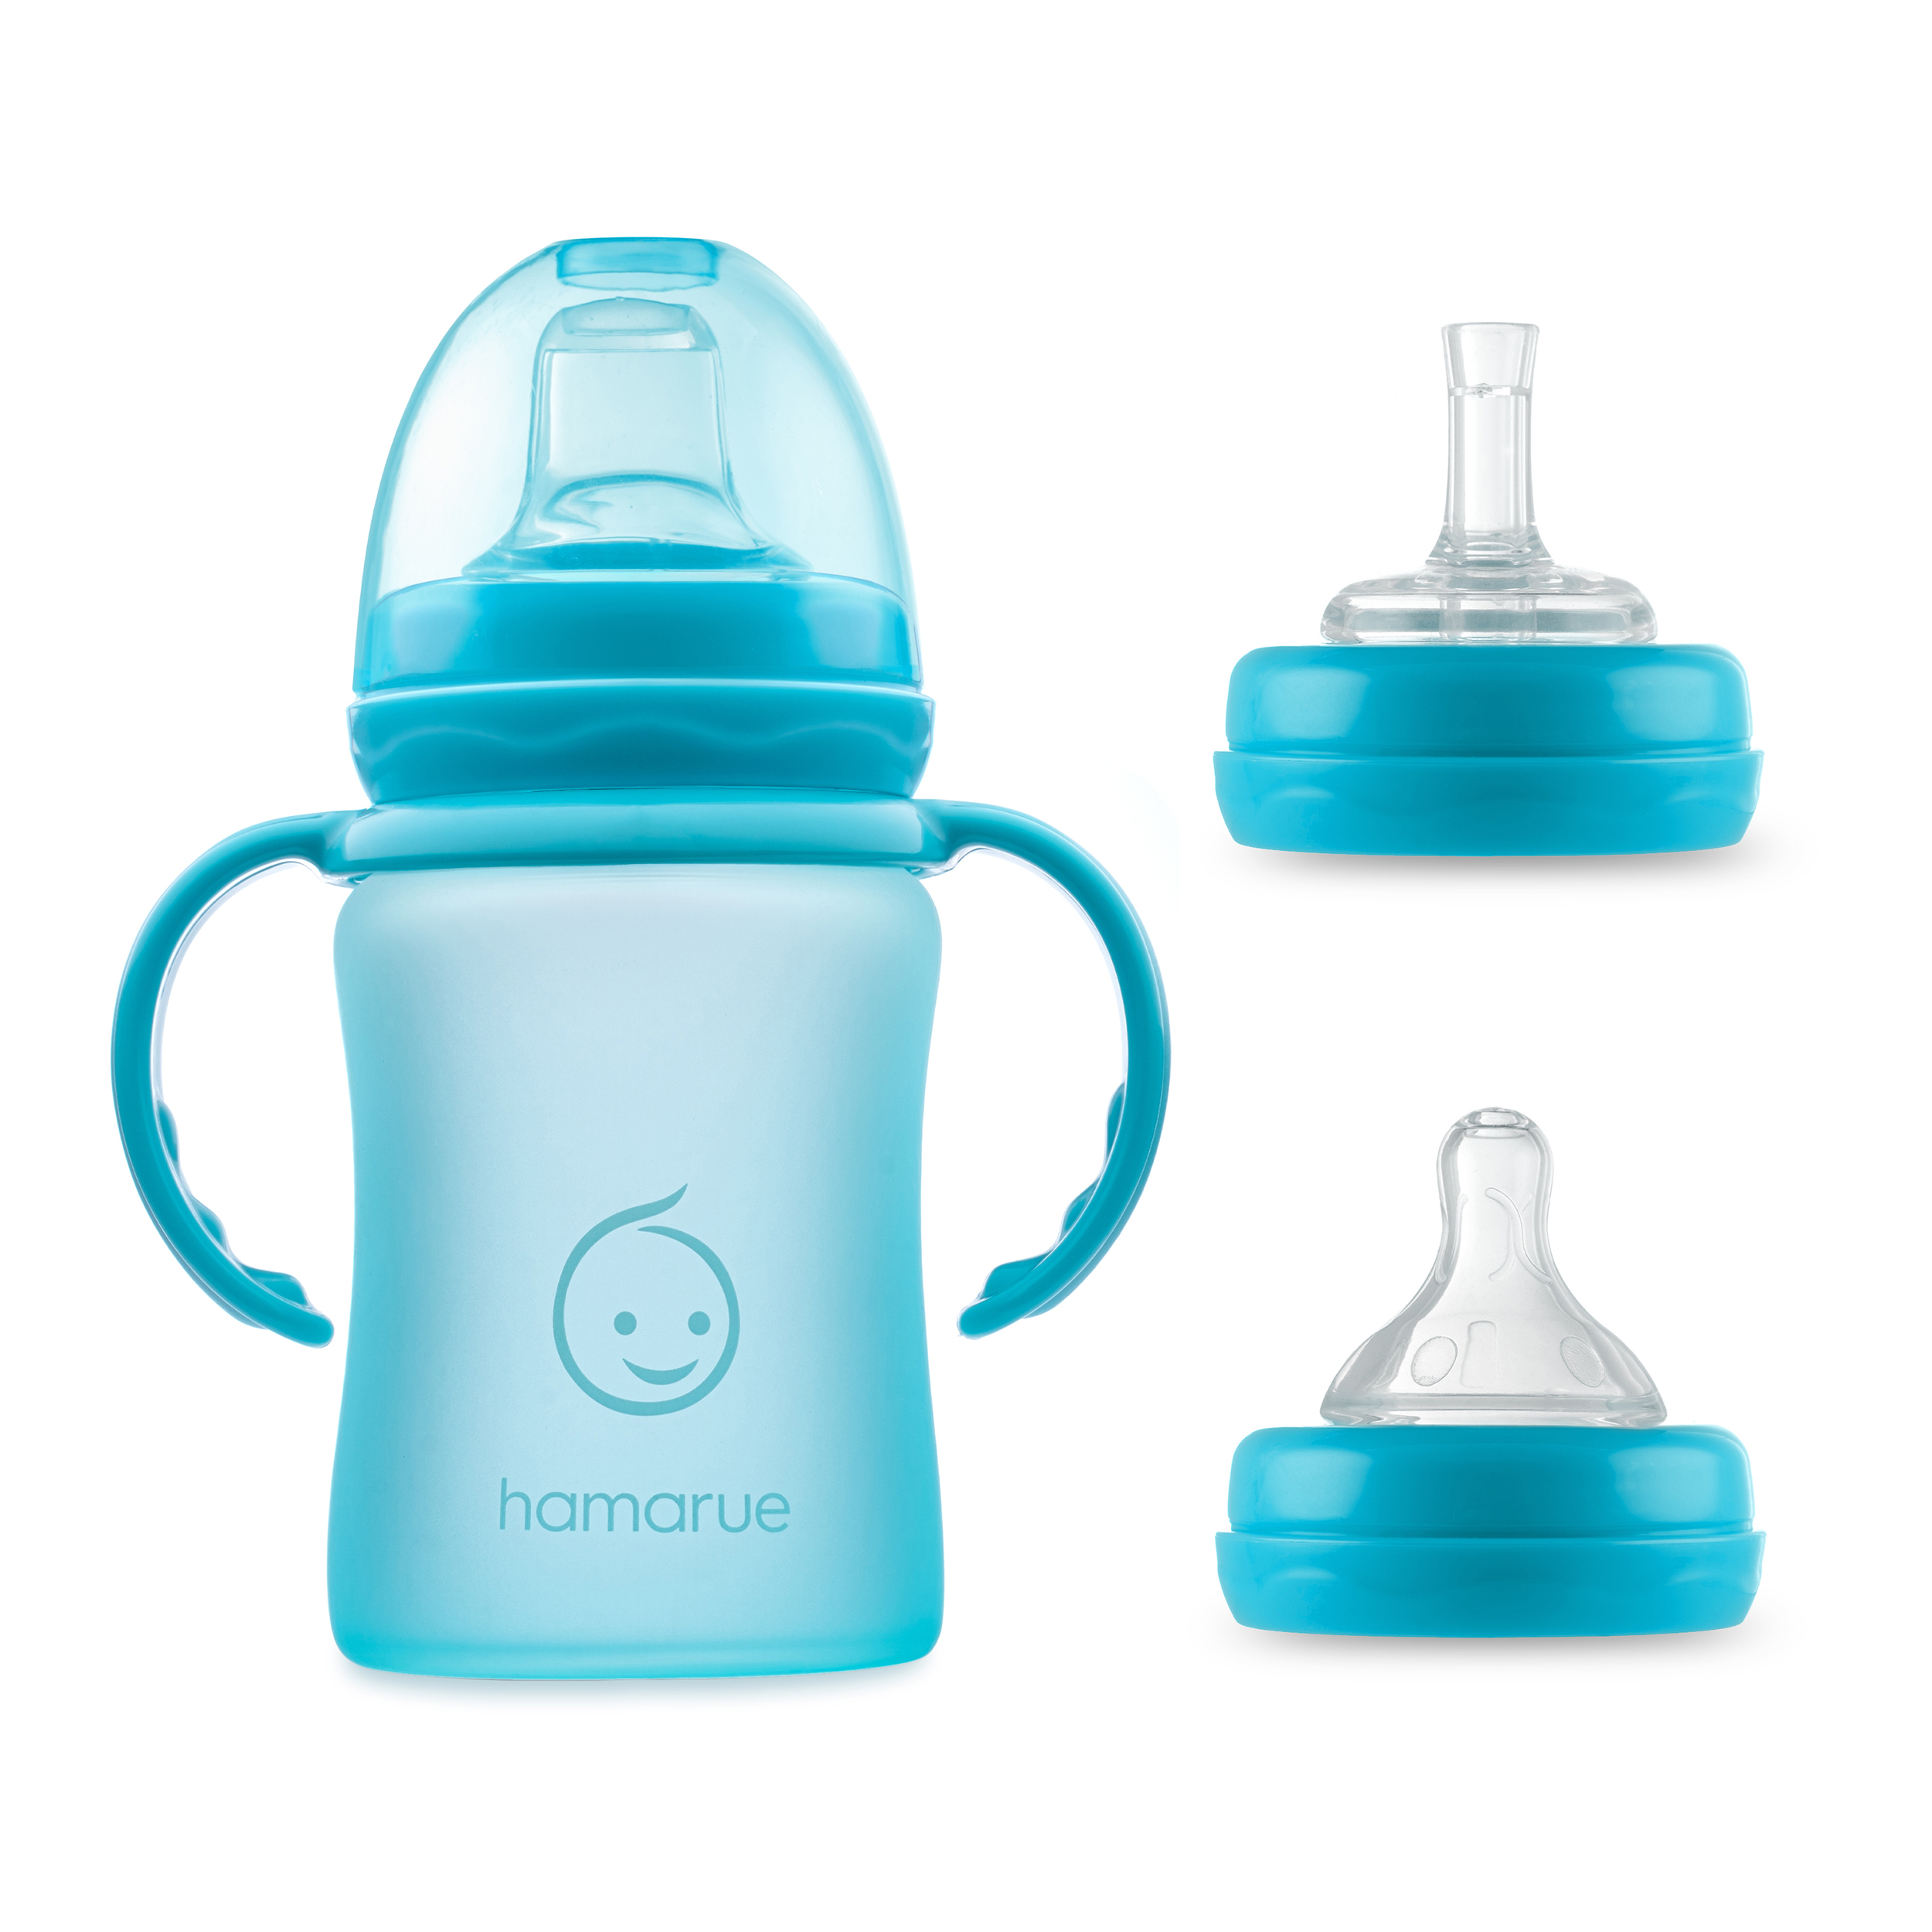 No-Spill Sippy Cup - Mint